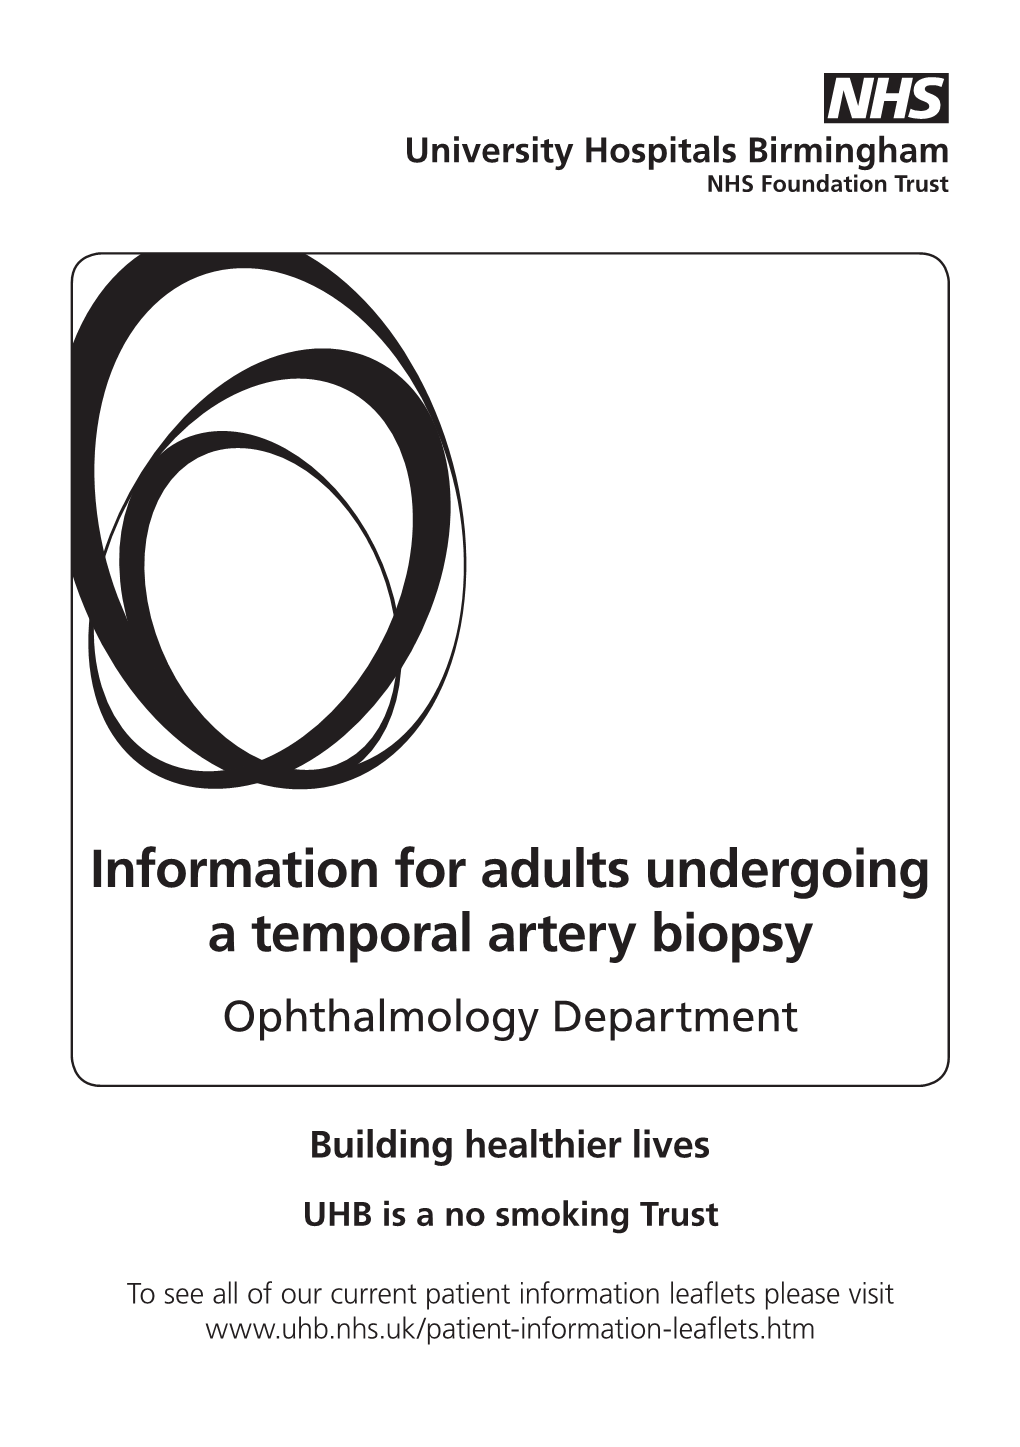 Information for Adults Undergoing a Temporal Artery Biopsy Ophthalmology Department